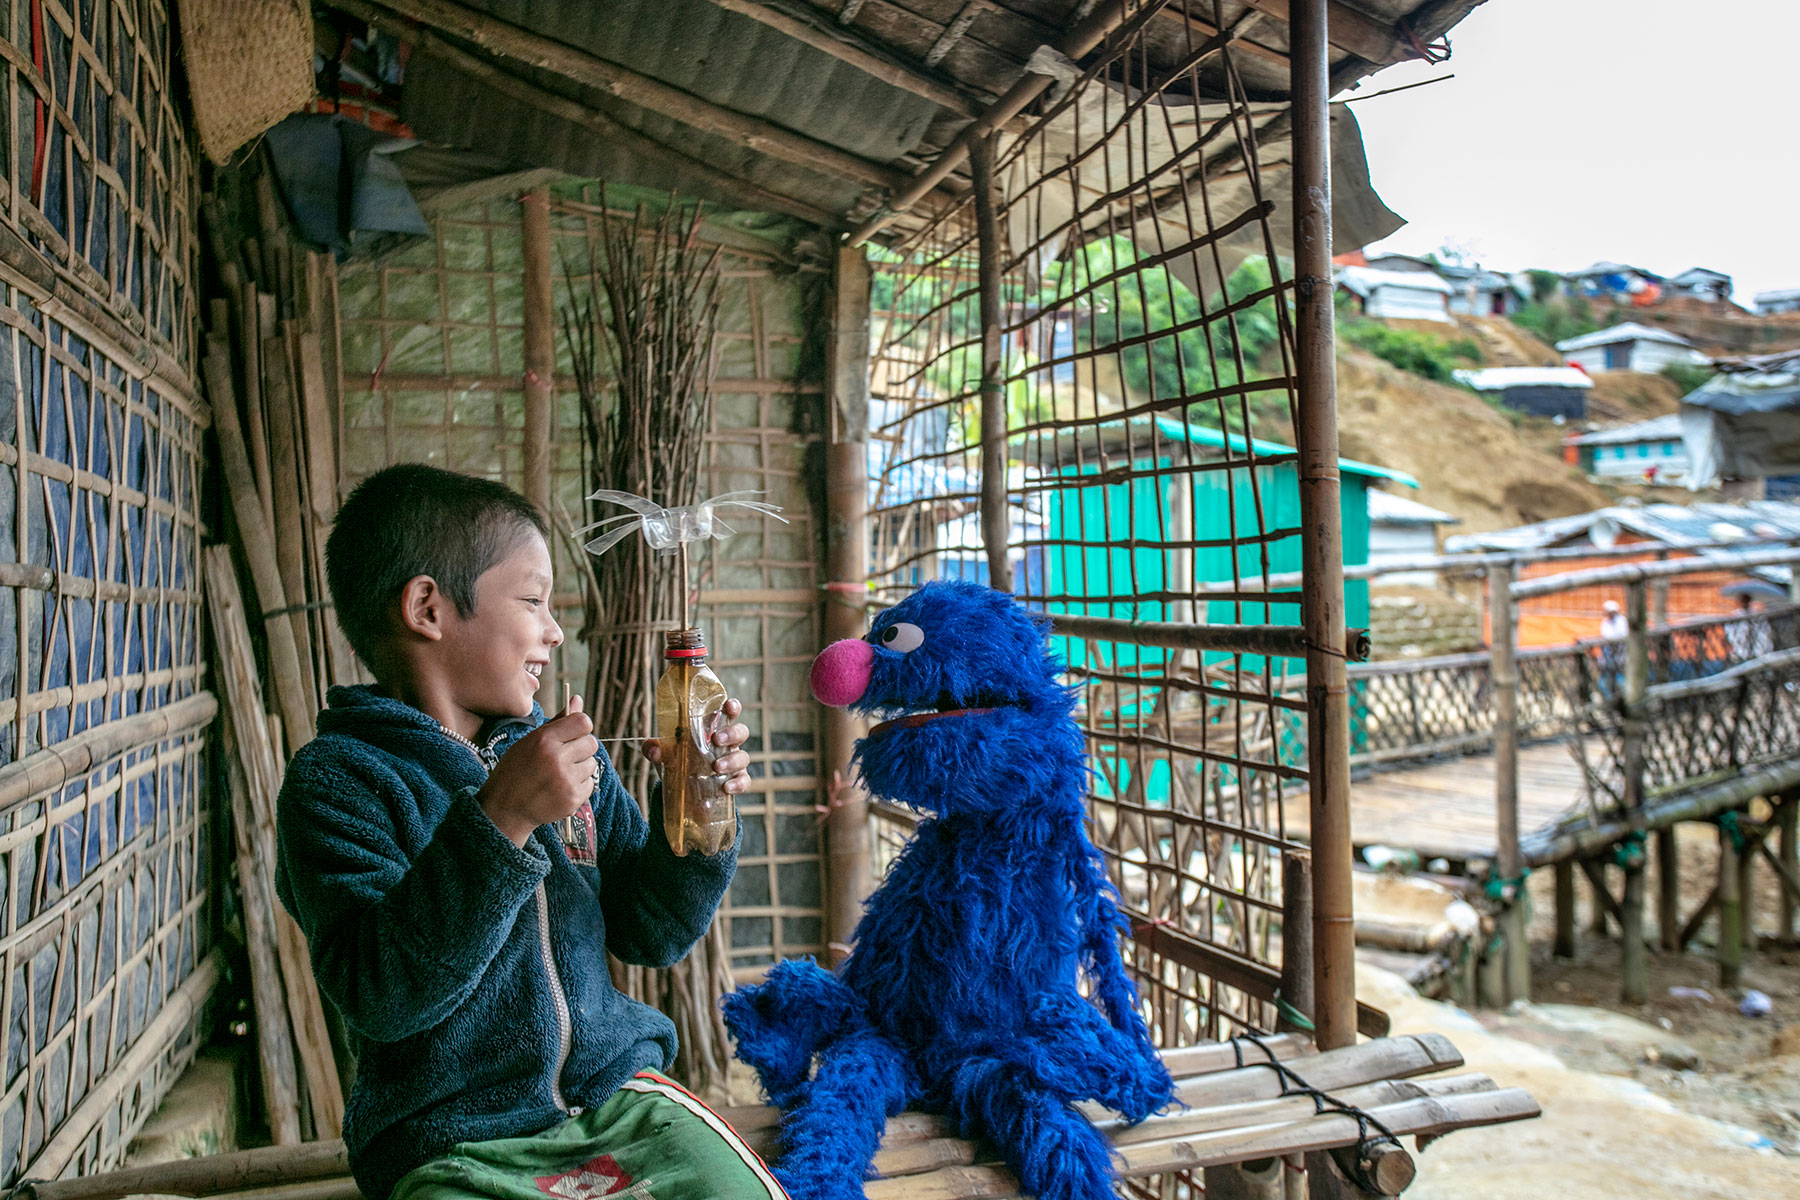 A Rohingya child plays with a muppet. Photo by Ryan Donnell for Sesame Workshop.